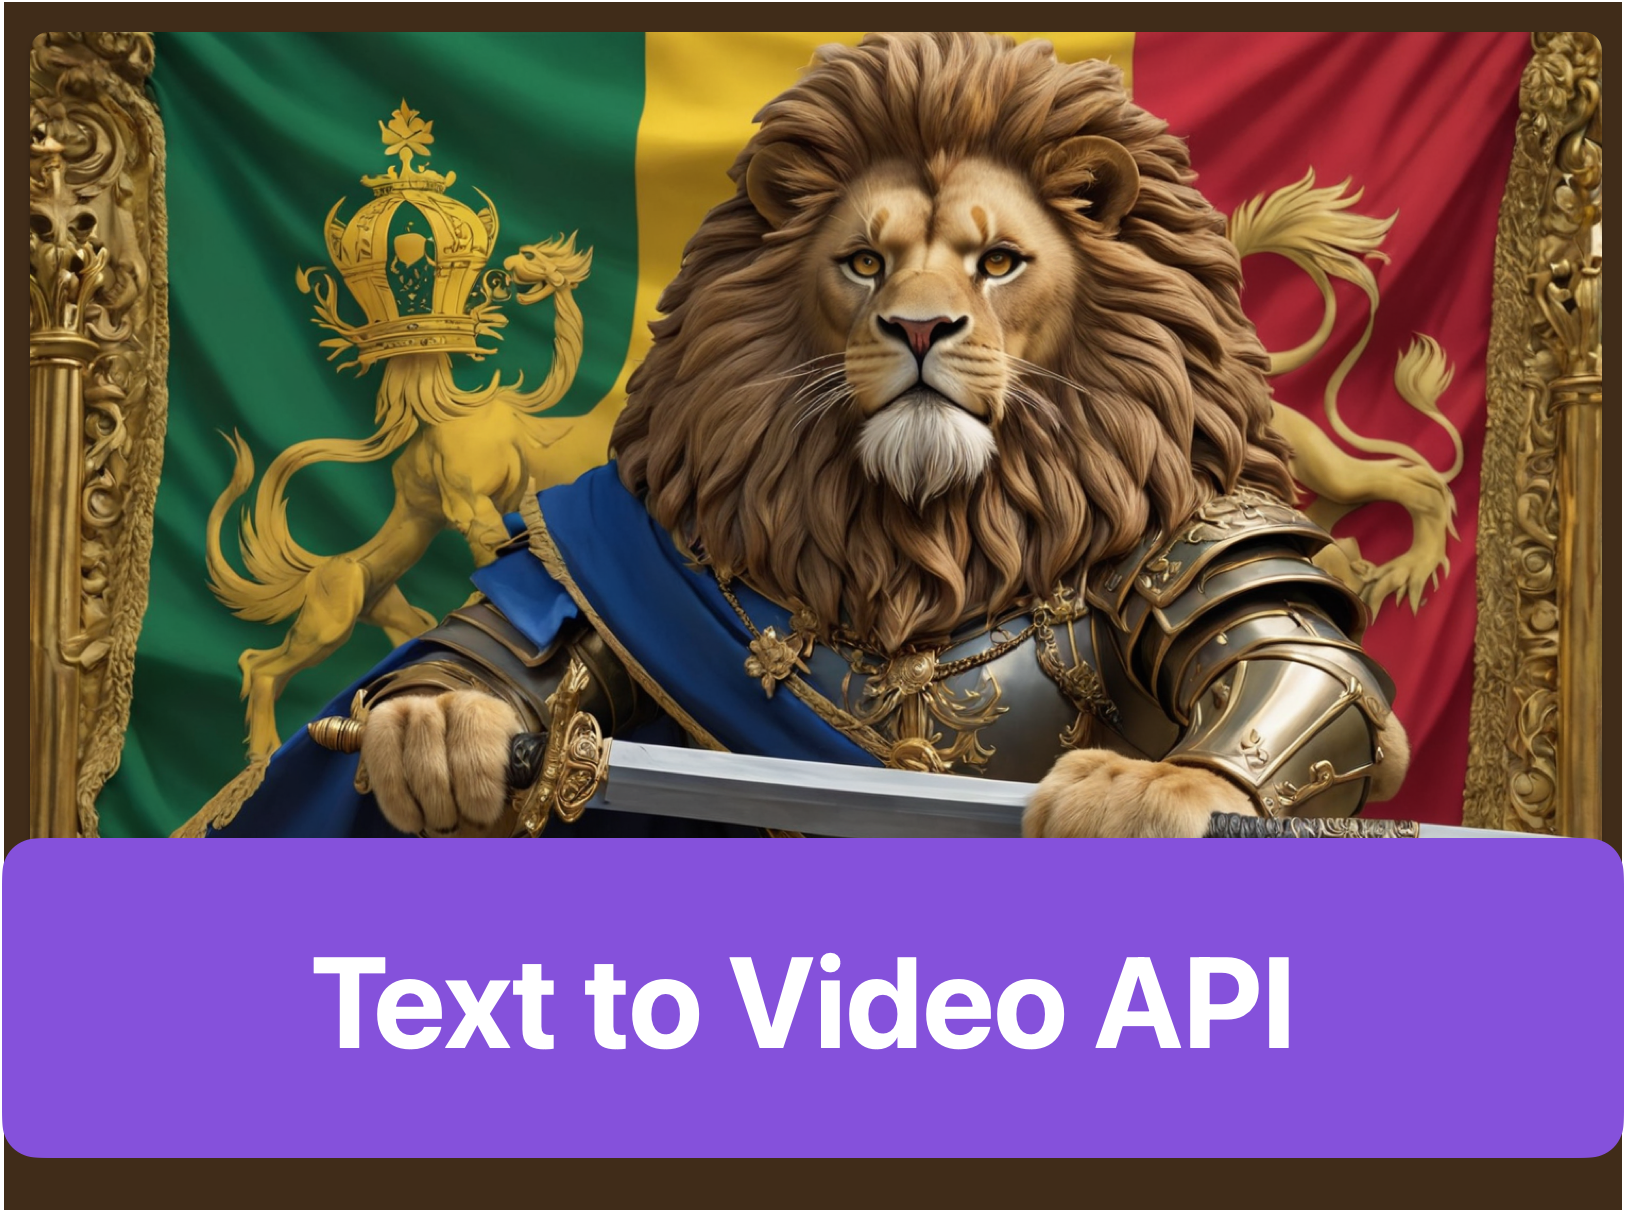 Video Generation Made Easy with Text to Video API